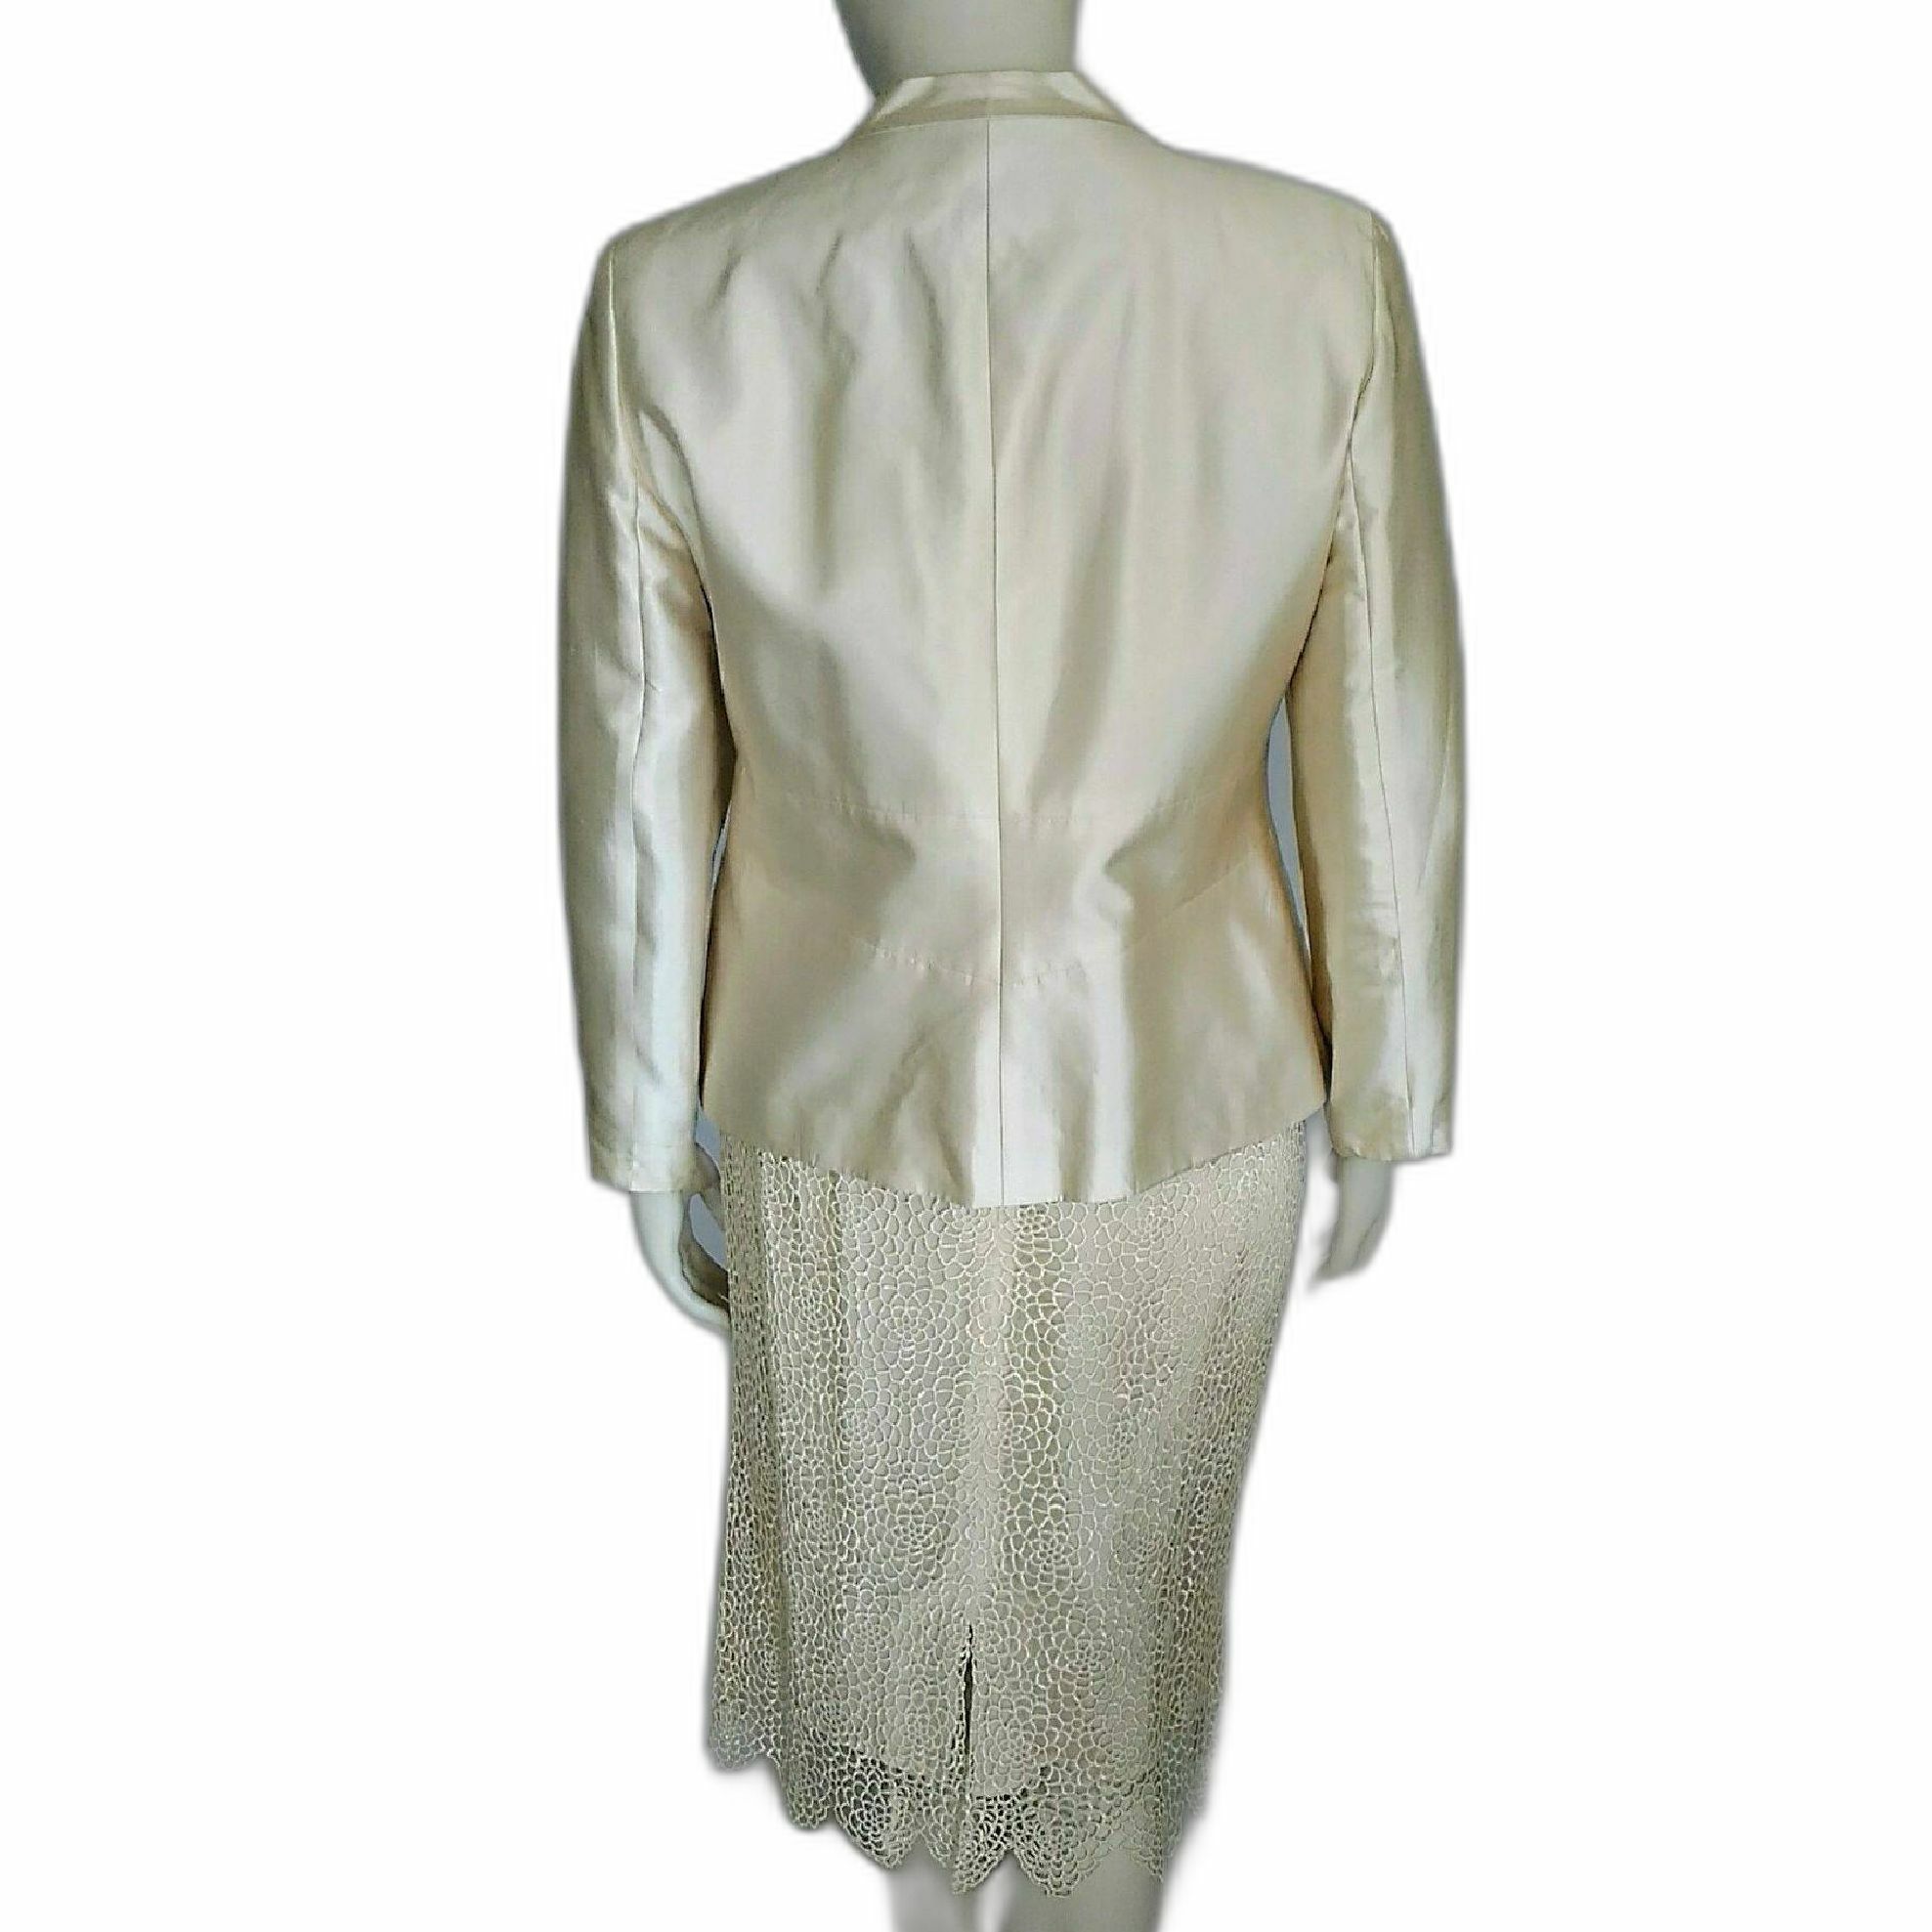 Vintage 1990's Larry Levine Cream Silk and Cotton Suit with Crochet Skirt